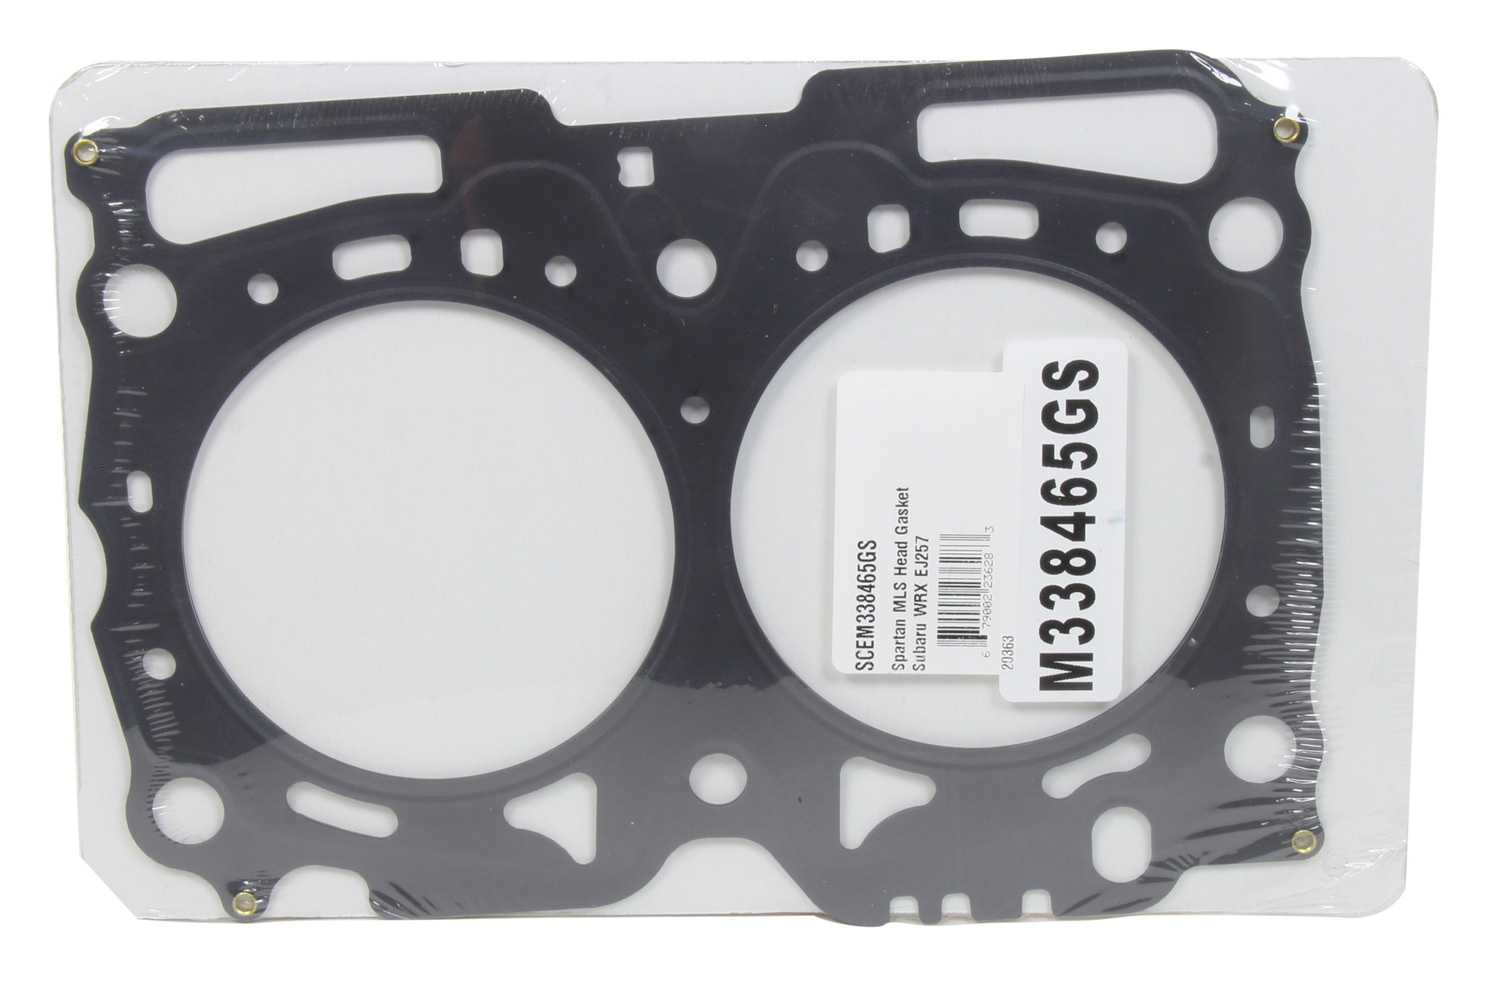 SCE Gaskets M338465GS - Cylinder Head Gasket, MLS Spartan, 101.30 mm Bore, 1.00 mm Compression Thickness, Multi-Layer Steel, Subaru 4-Cylinder, Each